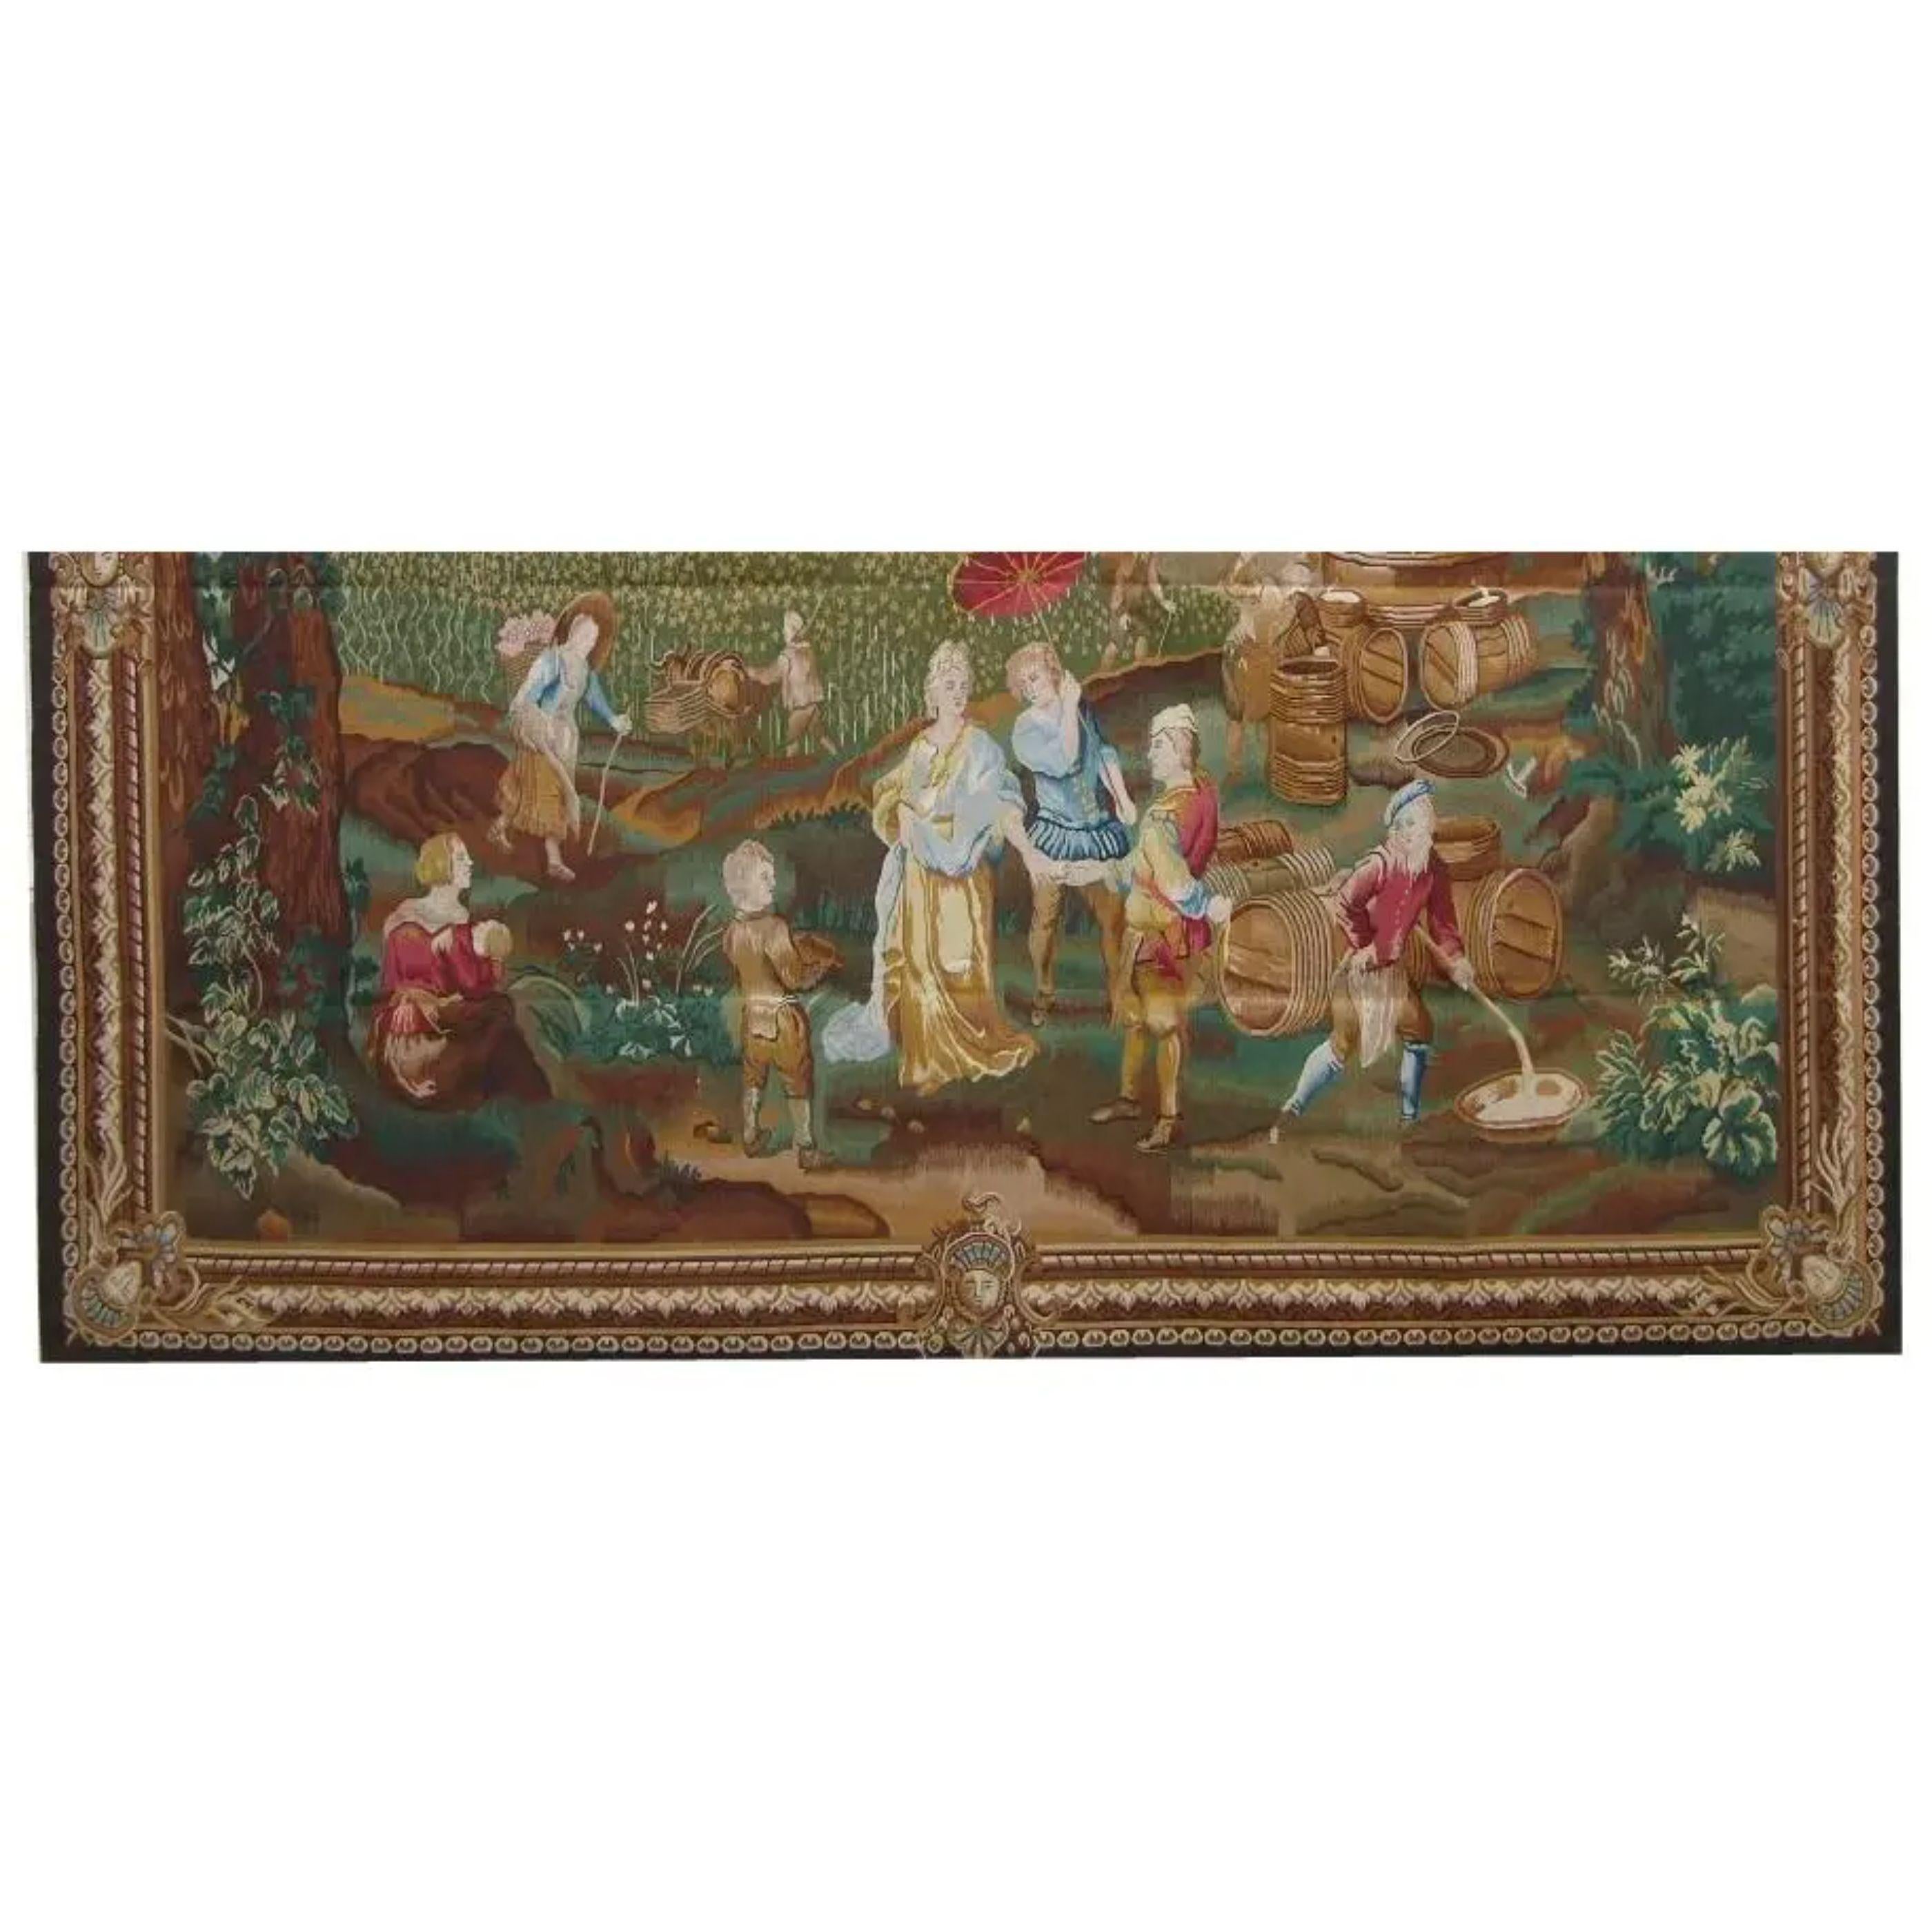 Empire Vintage Tapestry Depicting Royalty 8X6.5 For Sale